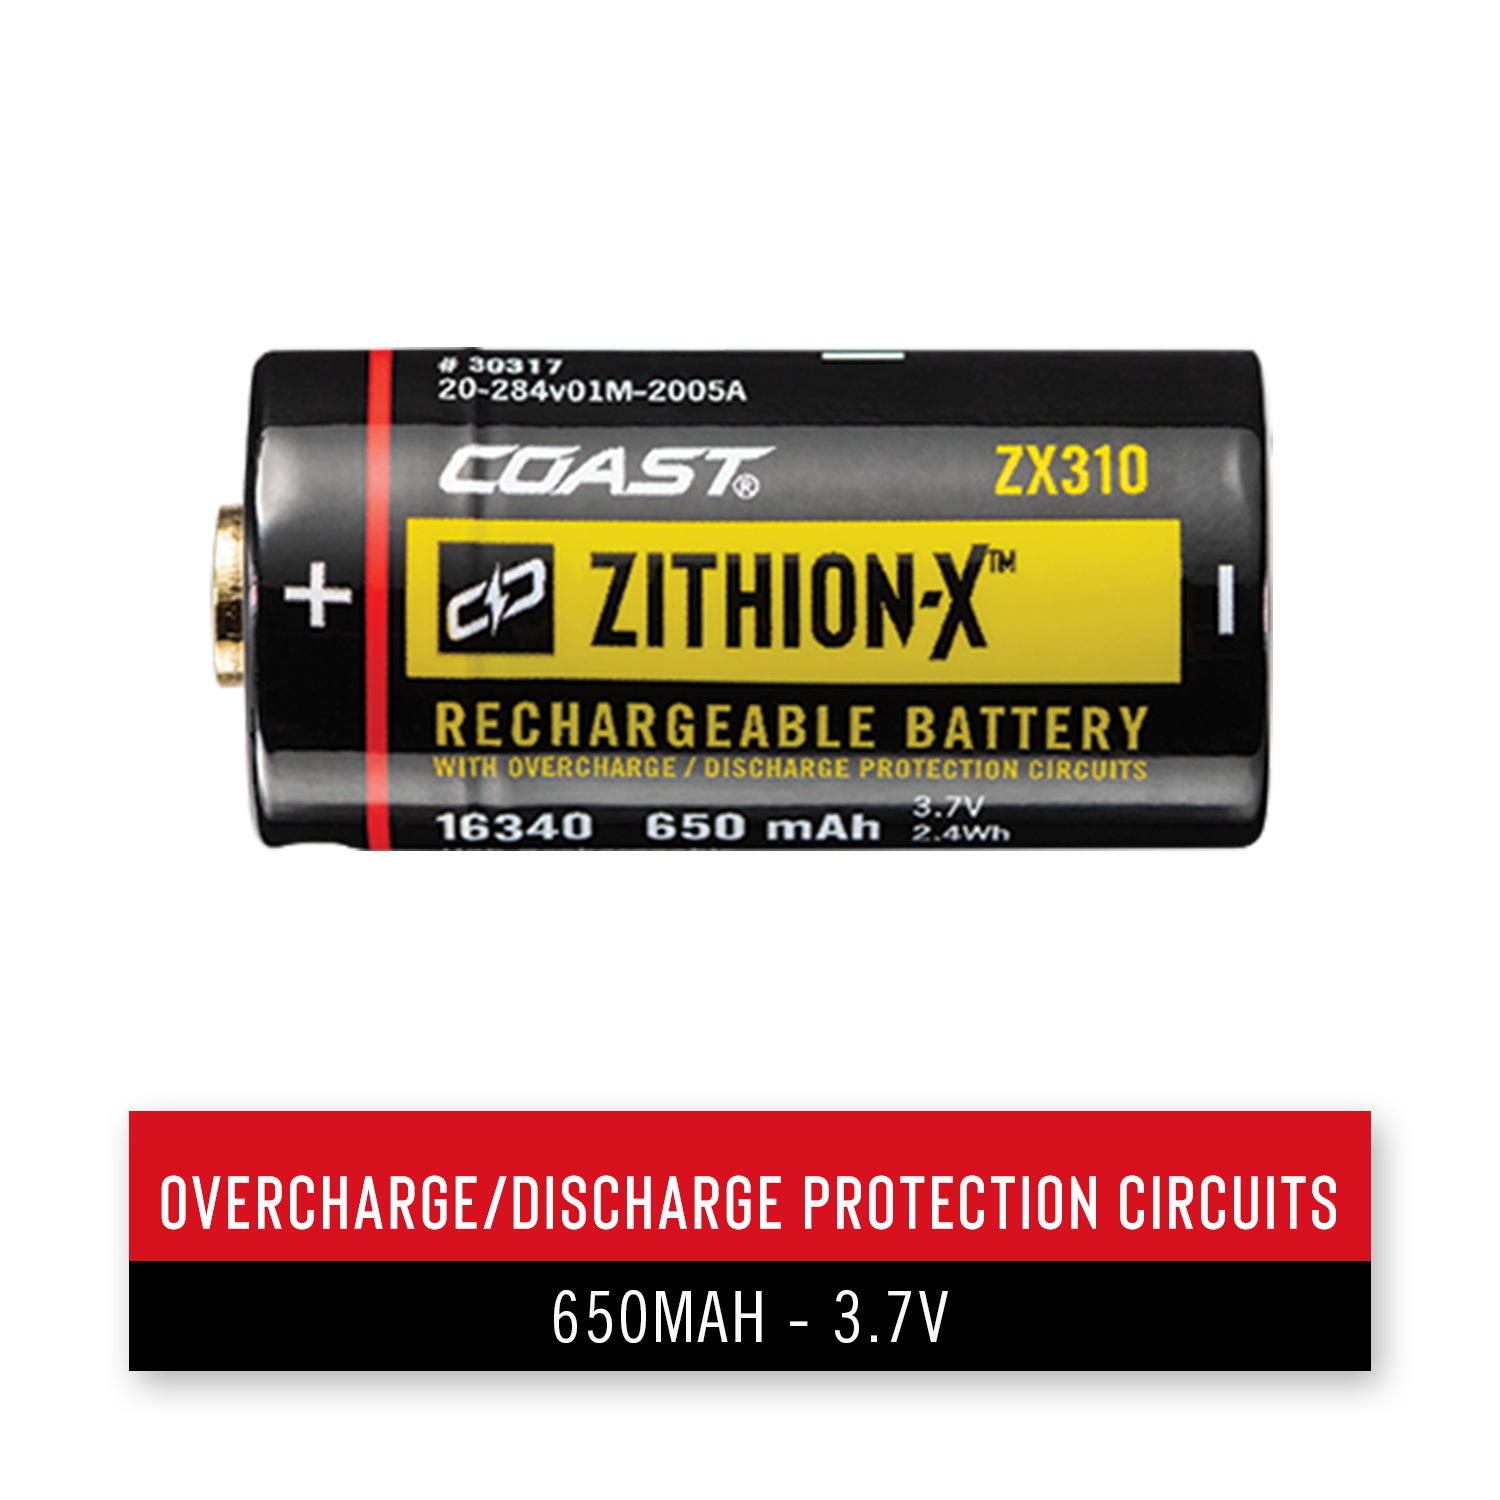 rechargeable lithium ion batteries